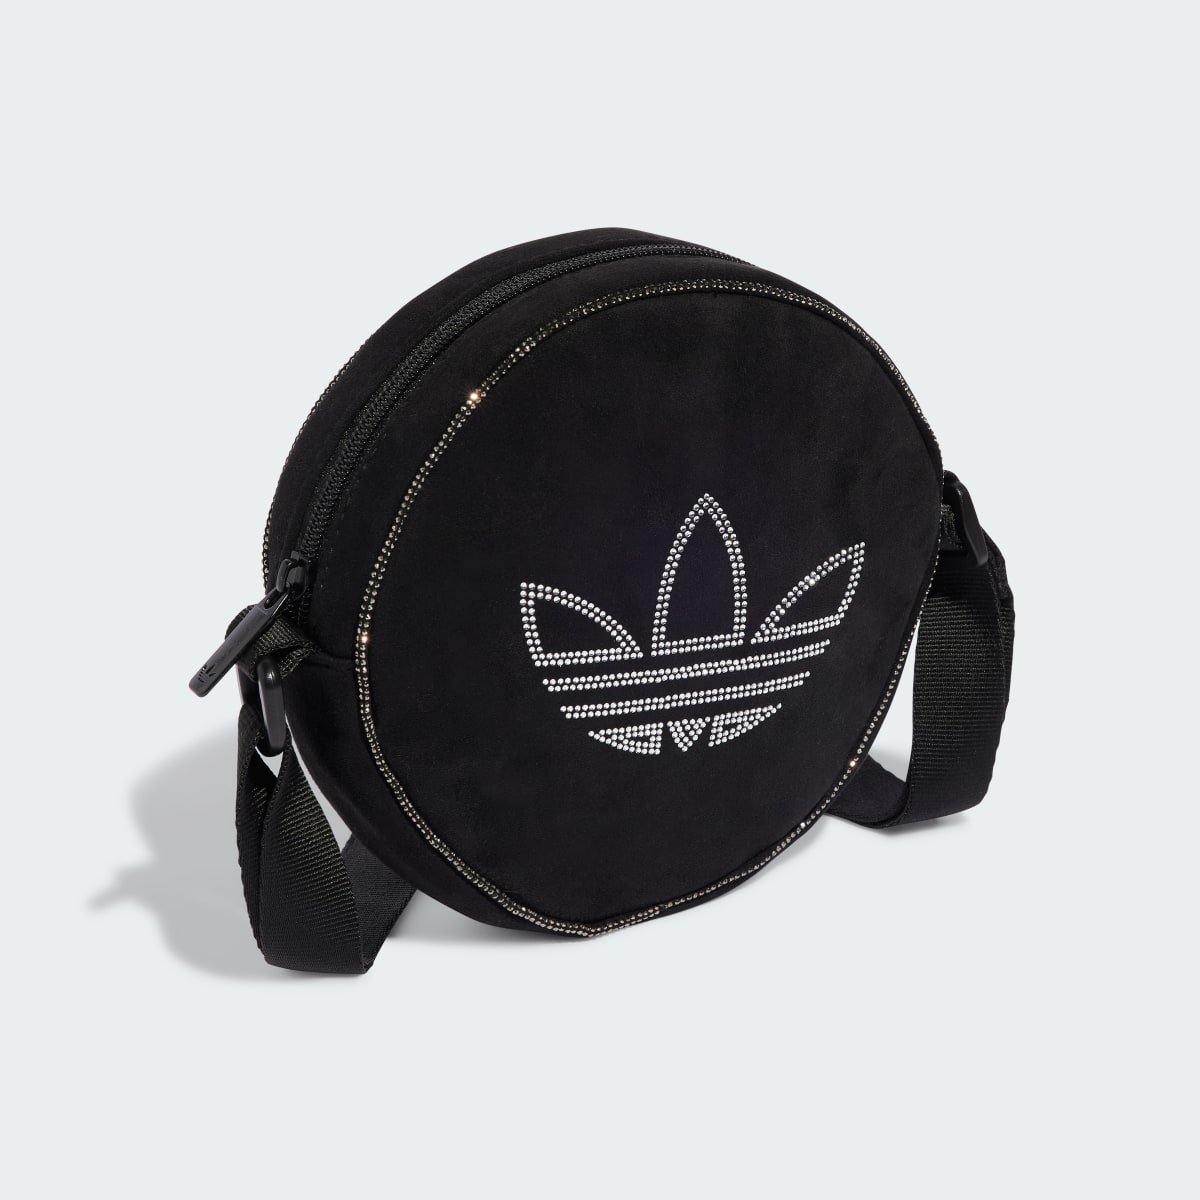 Adidas Sac rond matière synthétique strass. 4